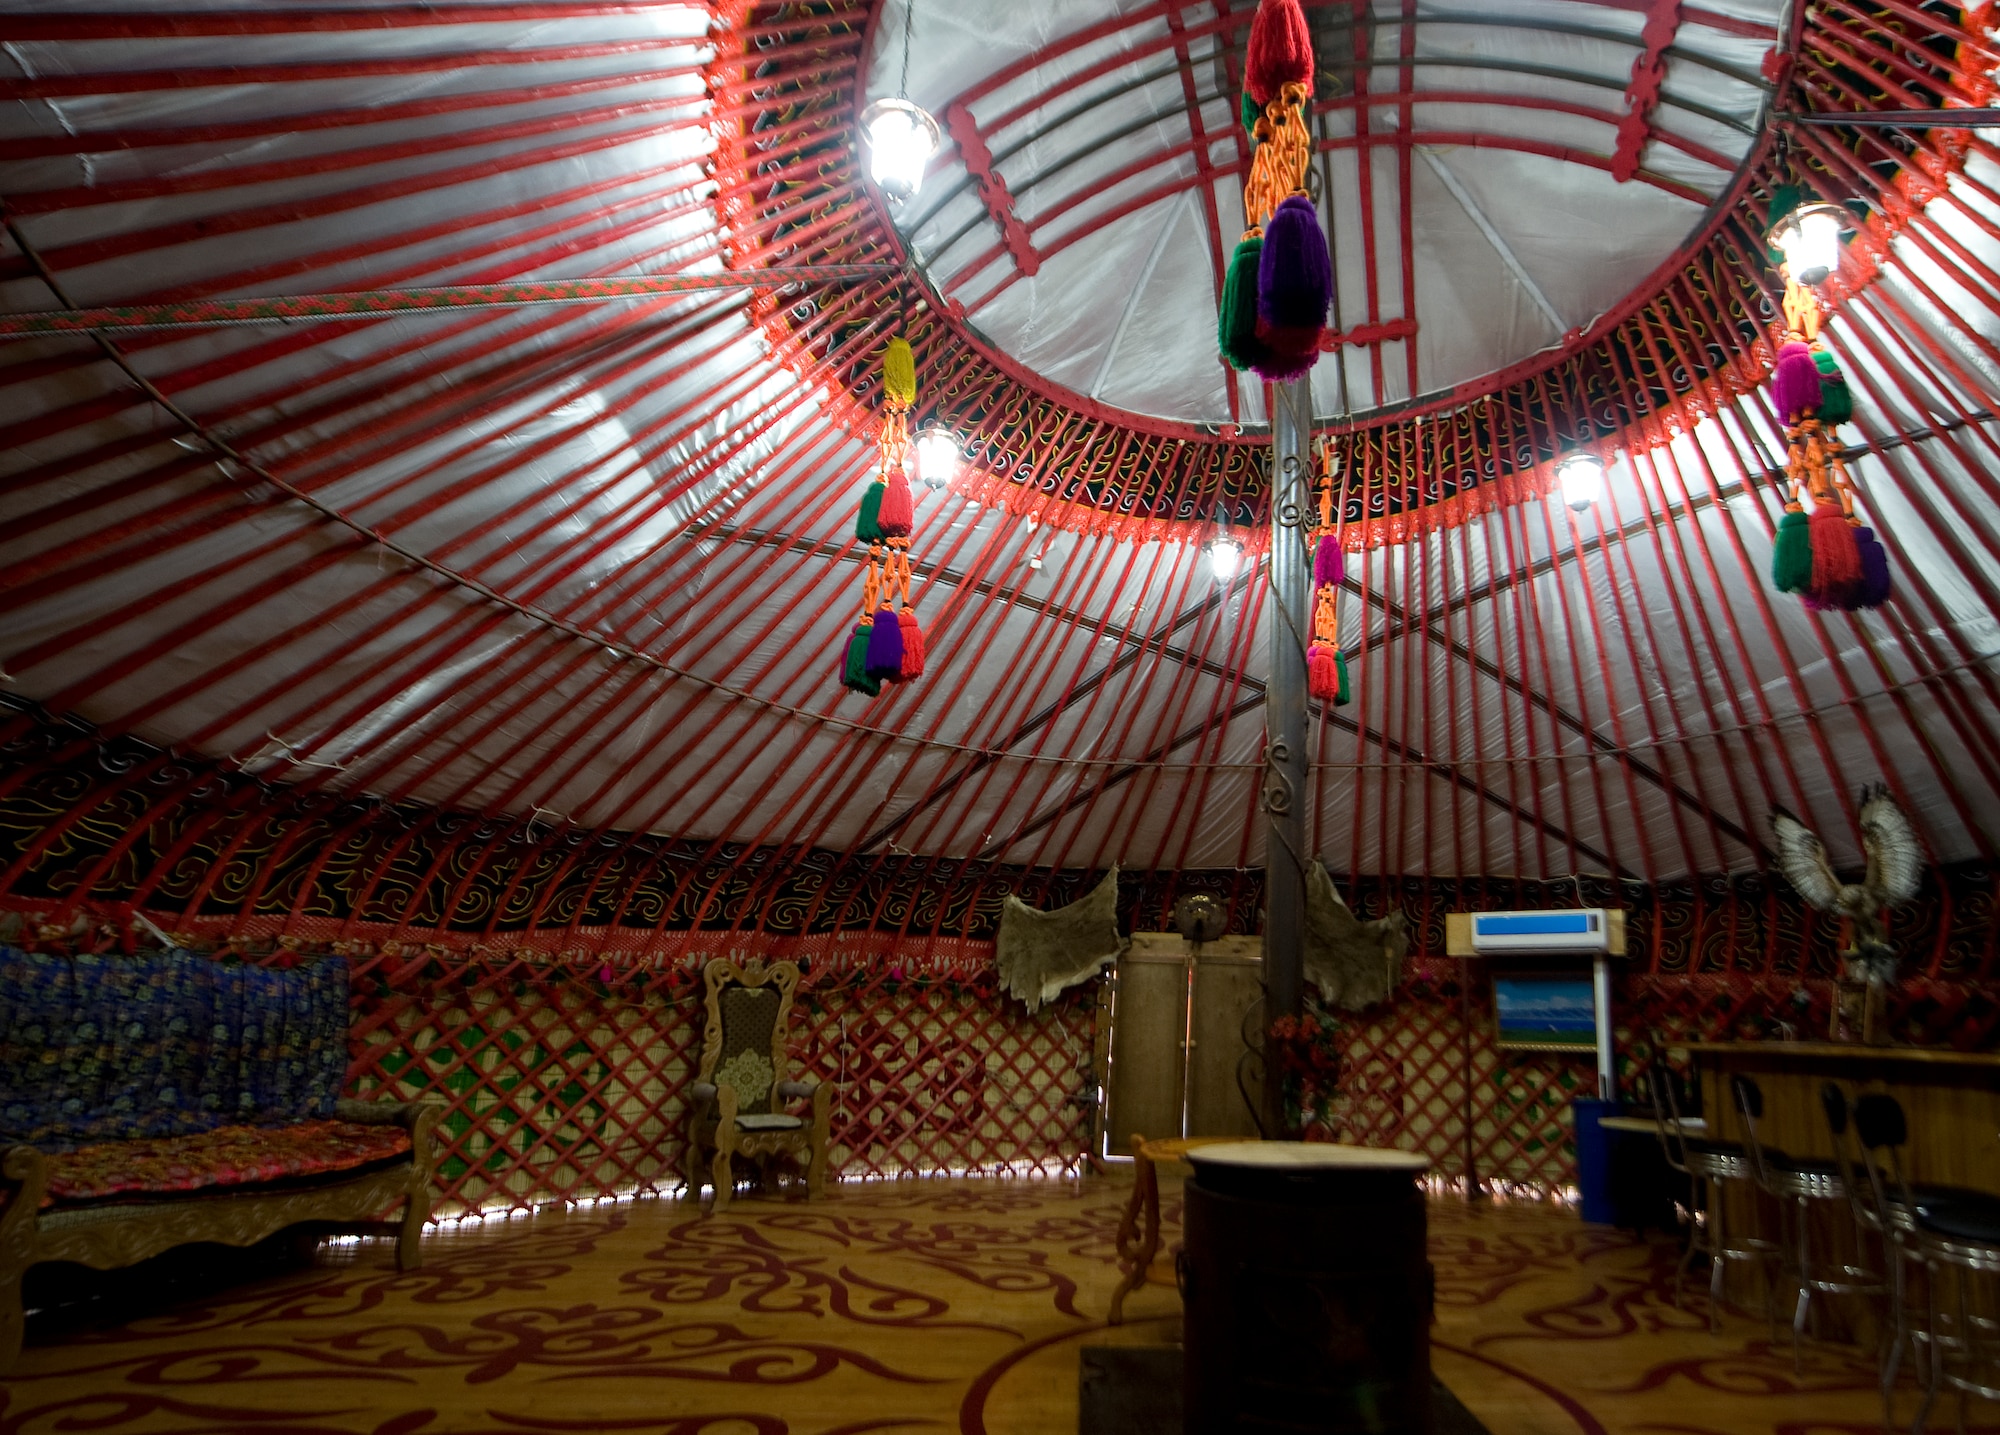 The Transit Center at Manas in Kyrgyzstan, embraces the Kyrgyz culture by adopting the use of a yurt. Yurts are common throughout Central Asia and are used as stores, homes and banquet halls as well as area attractions. (U.S. Air Force photo/Staff Sgt. Robert Barnett)